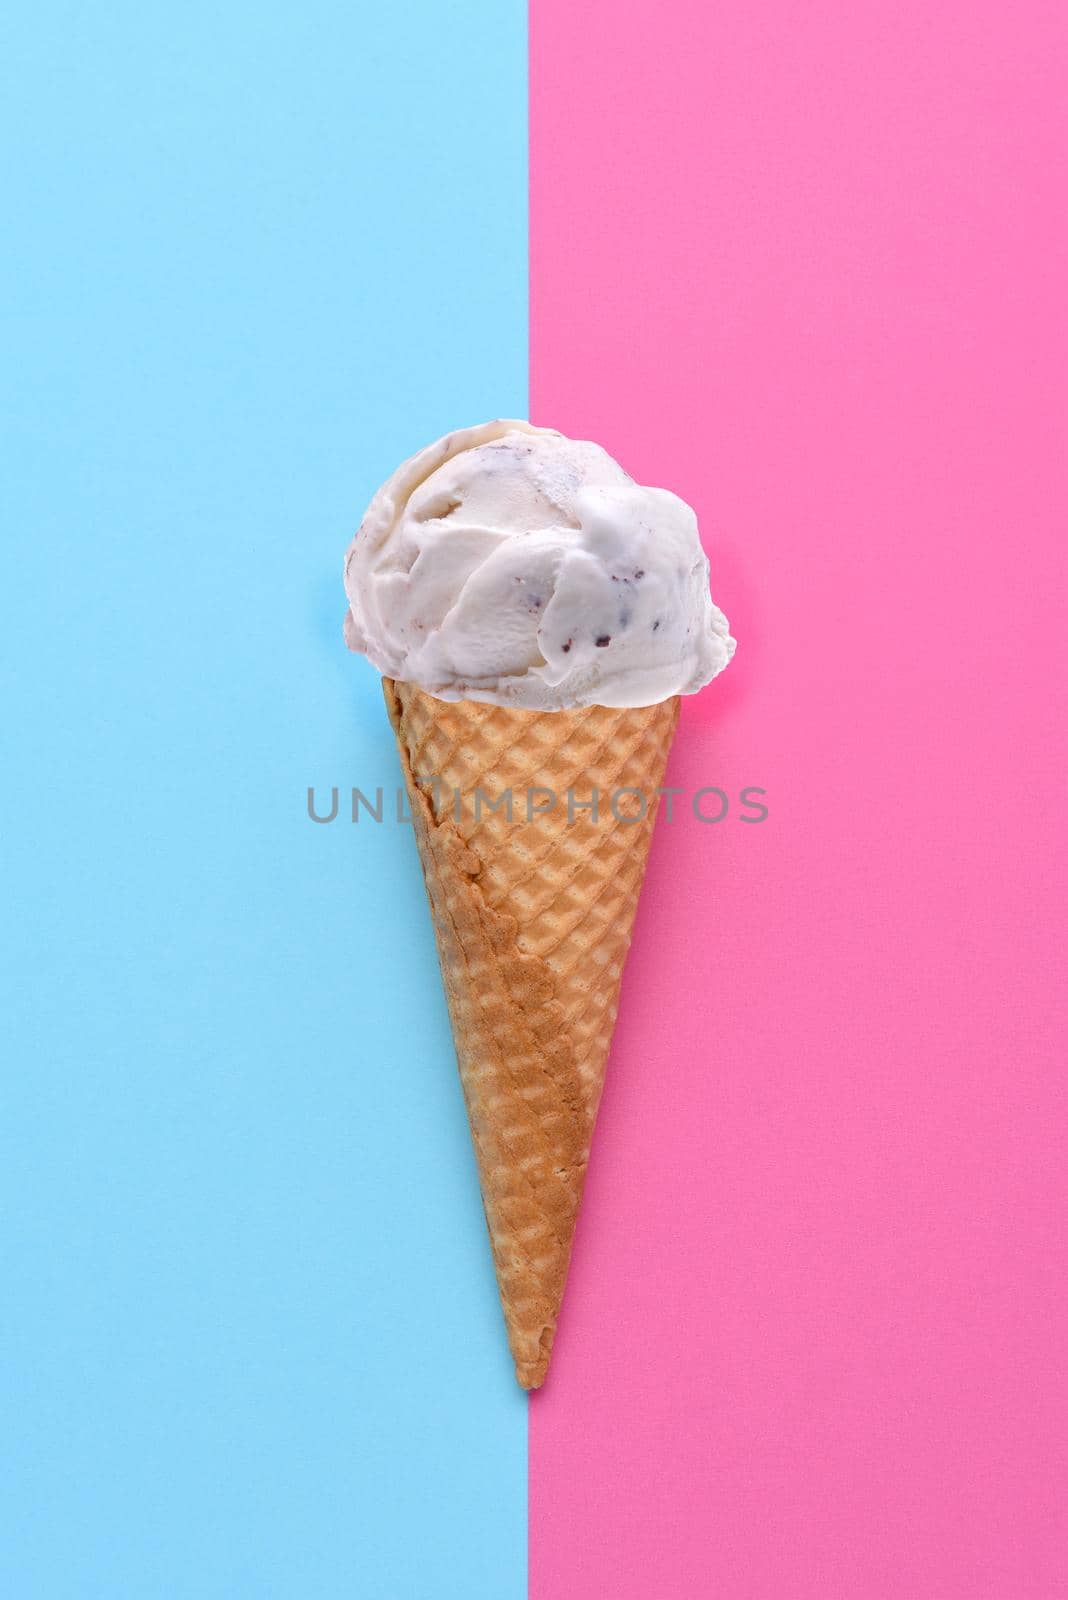 A Chocolate Chip Ice Cream Cone on a blue and pink background. Flat lay minimalist styling. 